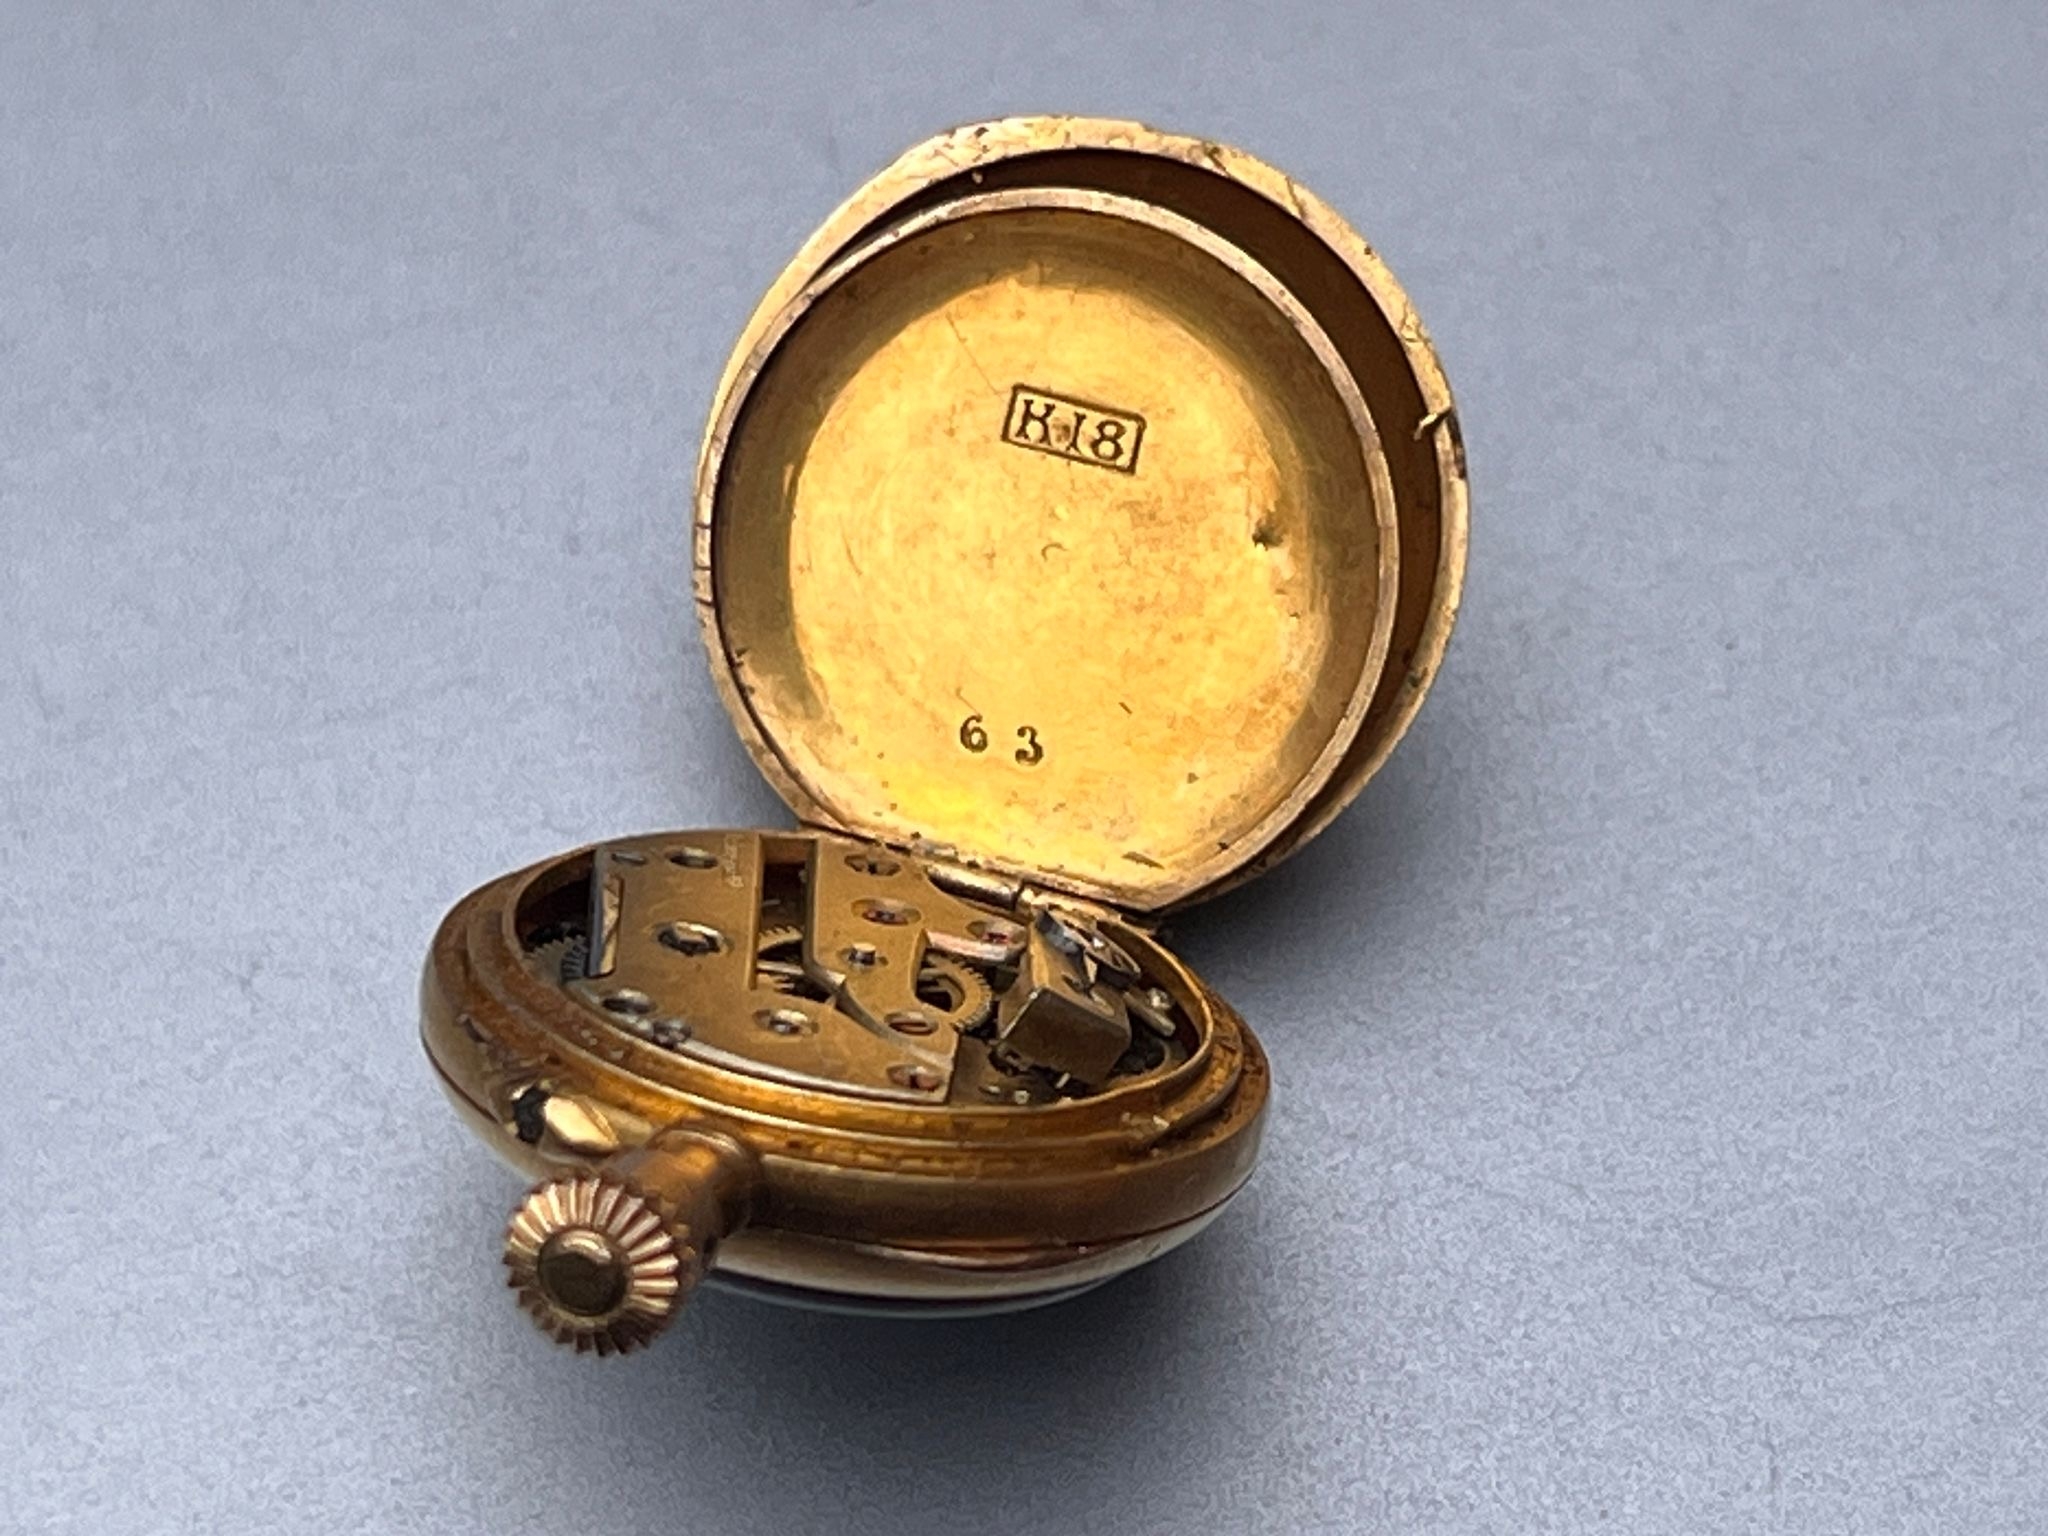 Miniature 18ct gold leCoultre pocket watch weight 9 gms the watch is not ticking - Image 6 of 6